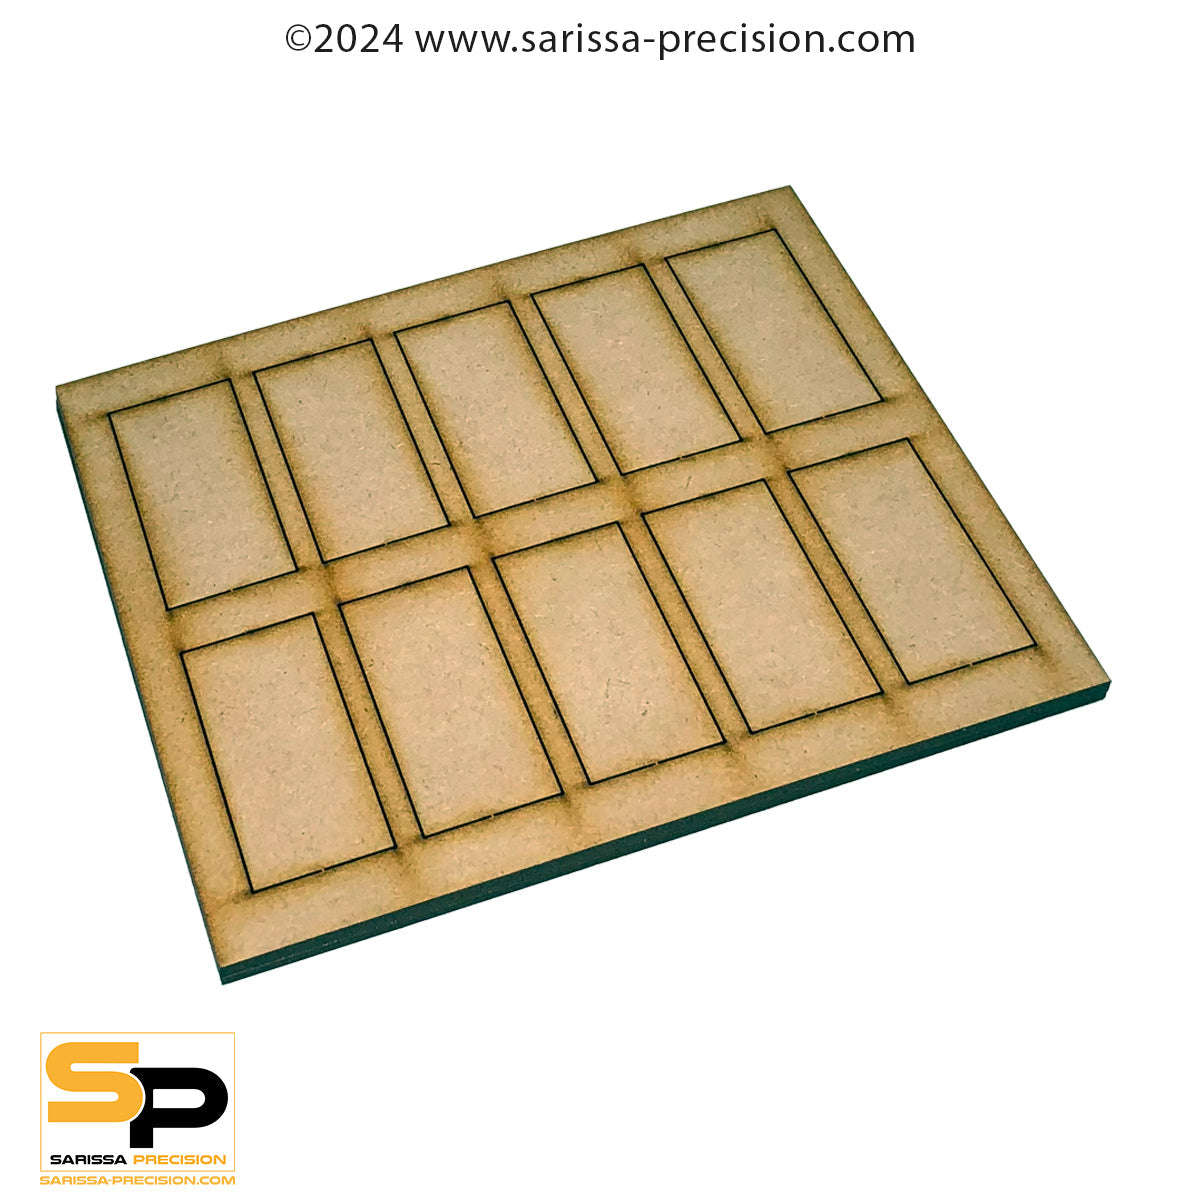 4 x 1 30x60mm Cavalry Conversion Tray for 25x50mm Bases